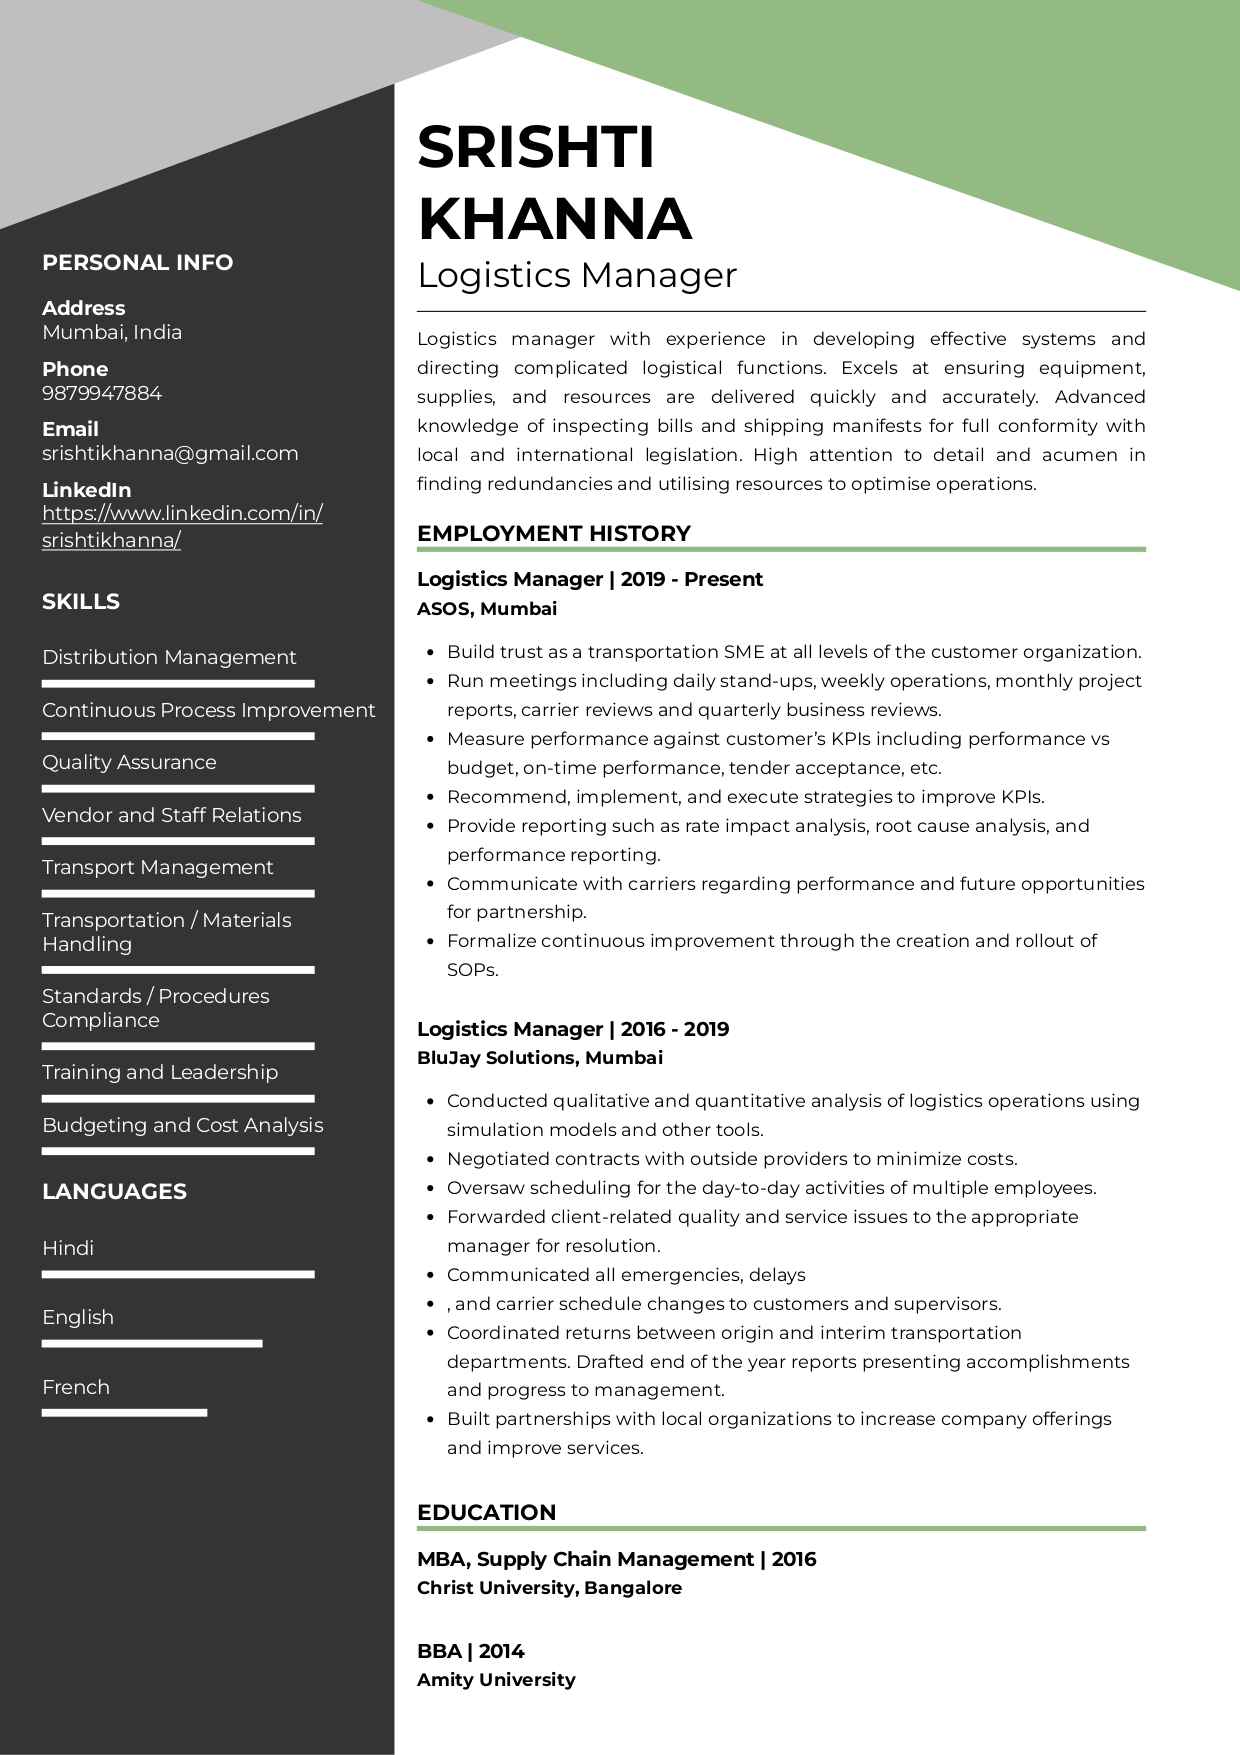 Sample Resume of Logistics Manager | Free Resume Templates & Samples on Resumod.co